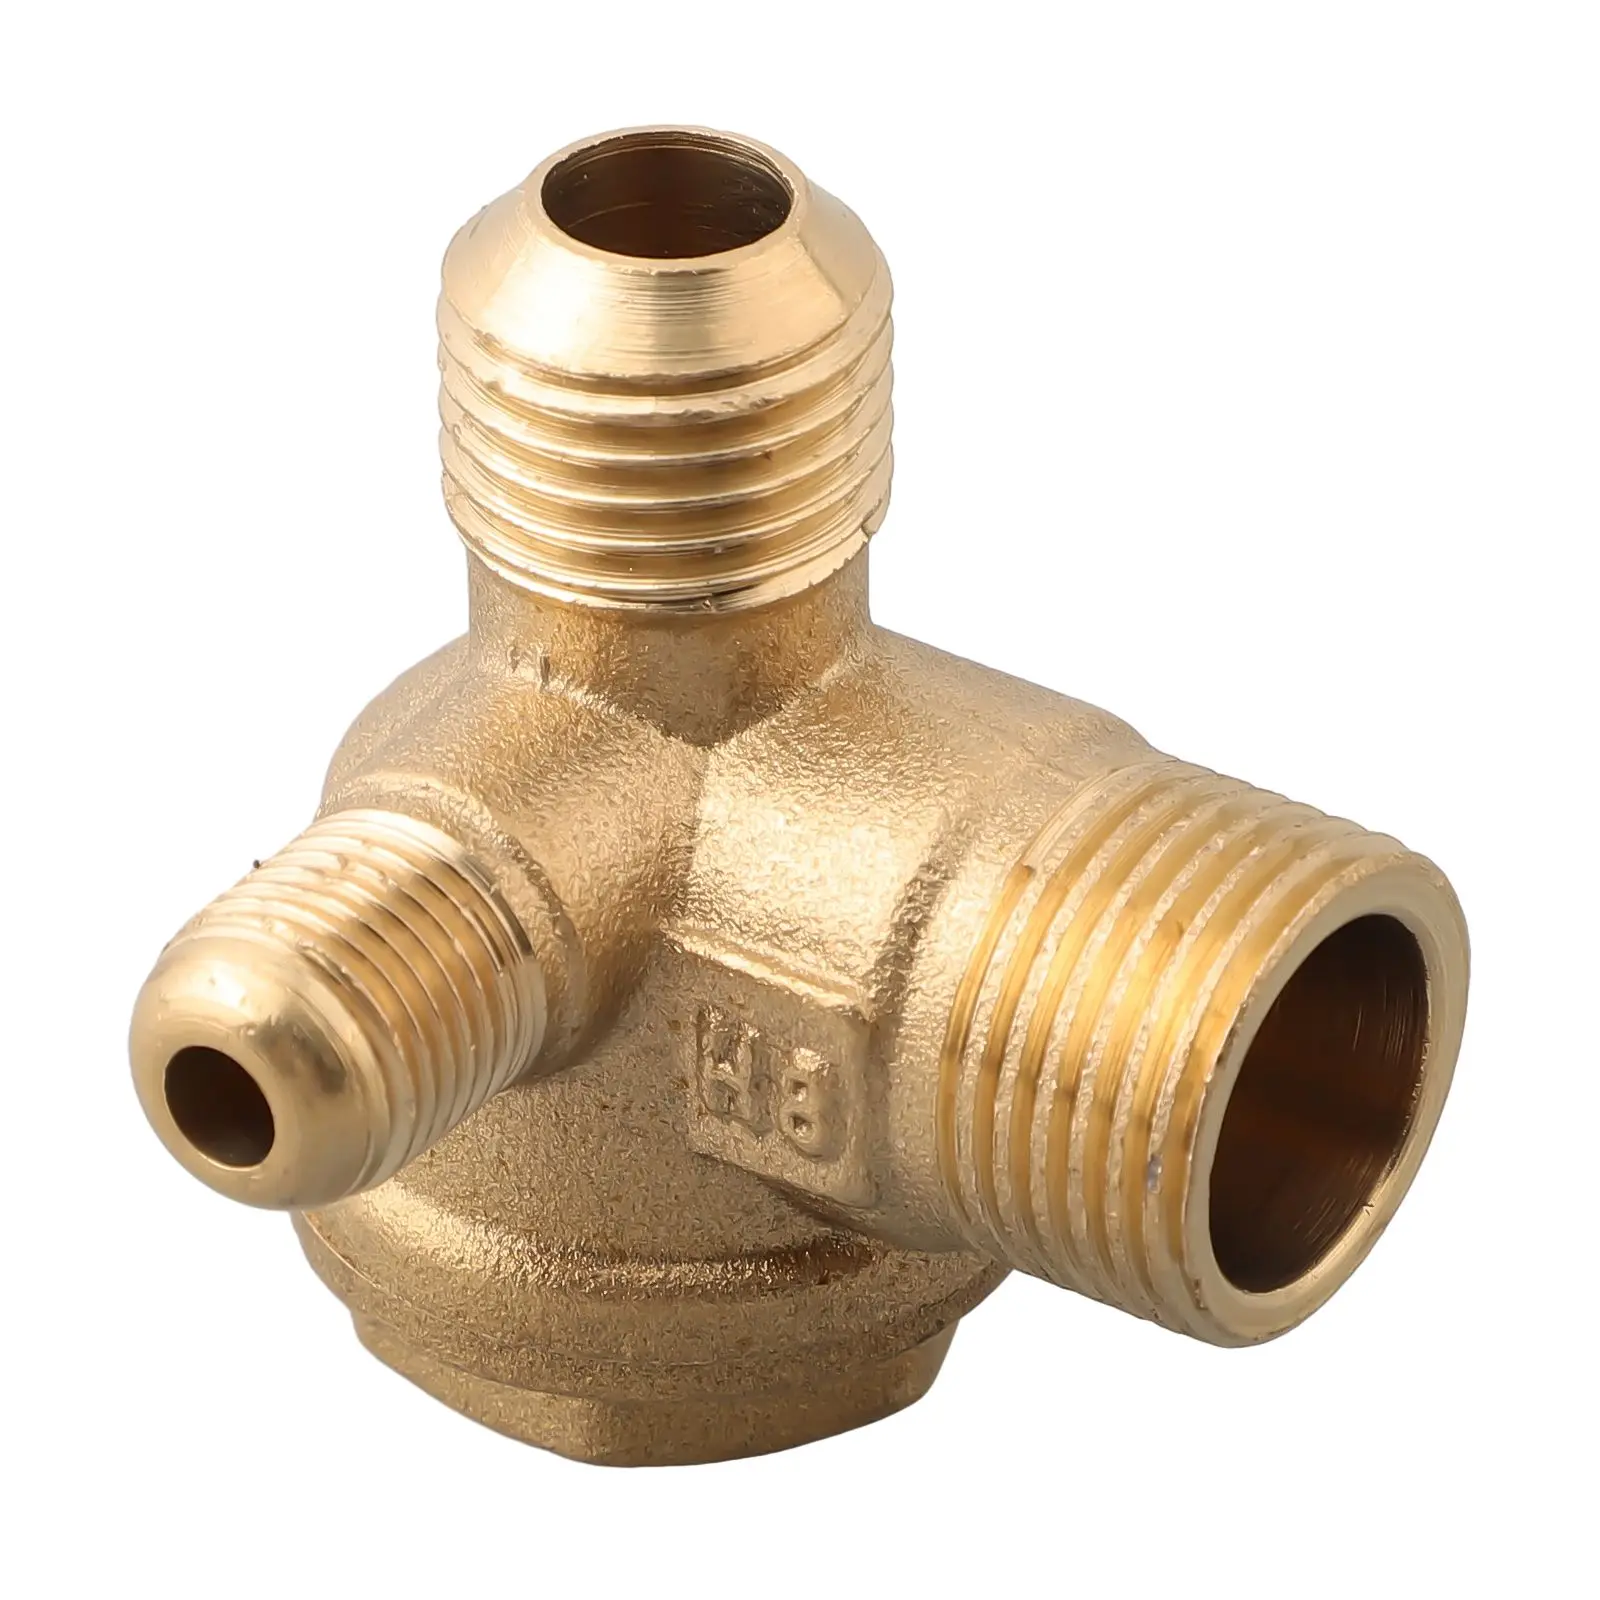 Unidirectional Air Pump Check Valve Connect Pipe Fittings Brass Cut-off Valve Air Compressor Accessories Replacement